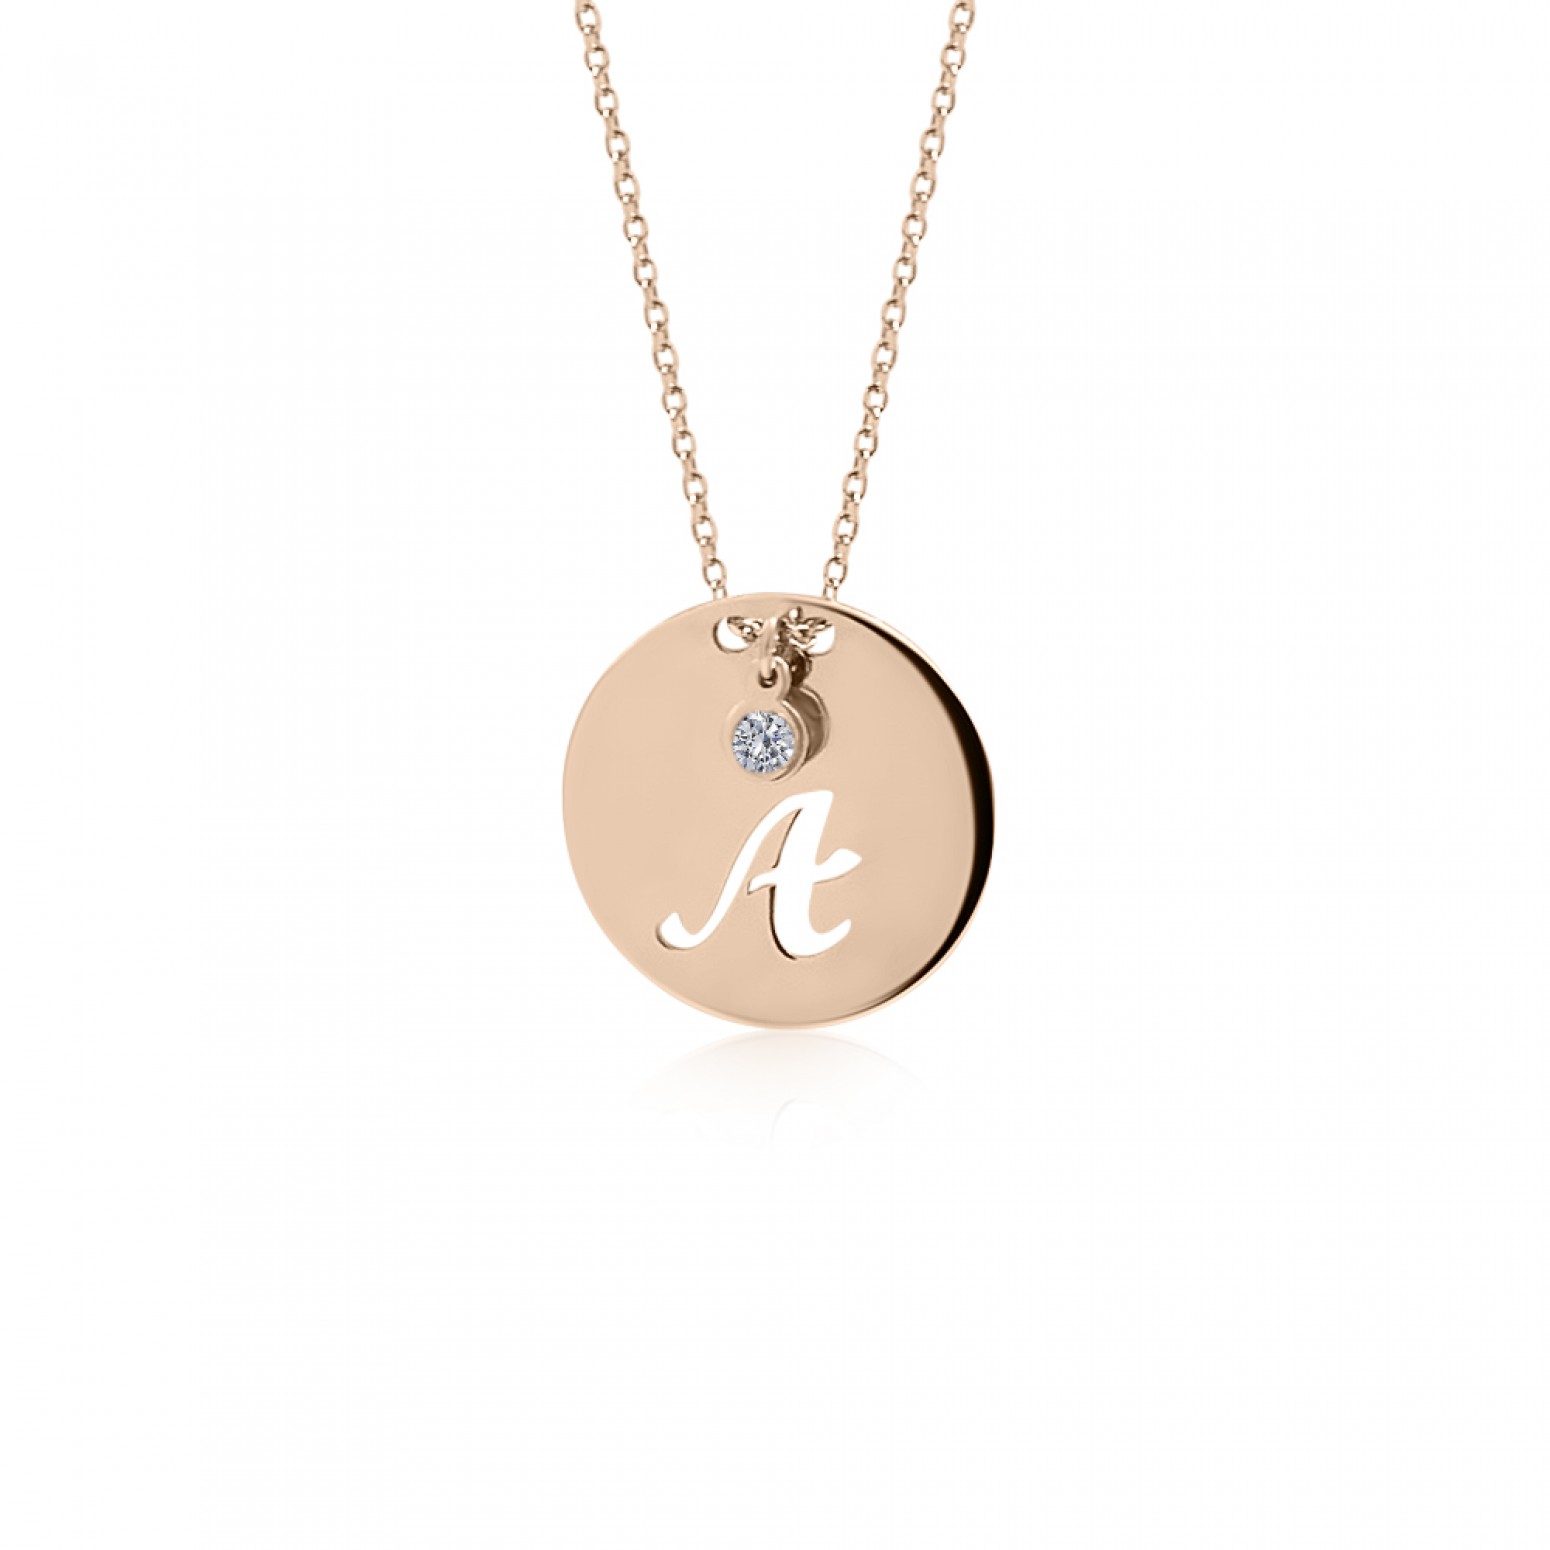 Monogram necklace A in round disk , Κ14 pink gold with diamond 0.02ct, VS2, H ko4381 NECKLACES Κοσμηματα - chrilia.gr